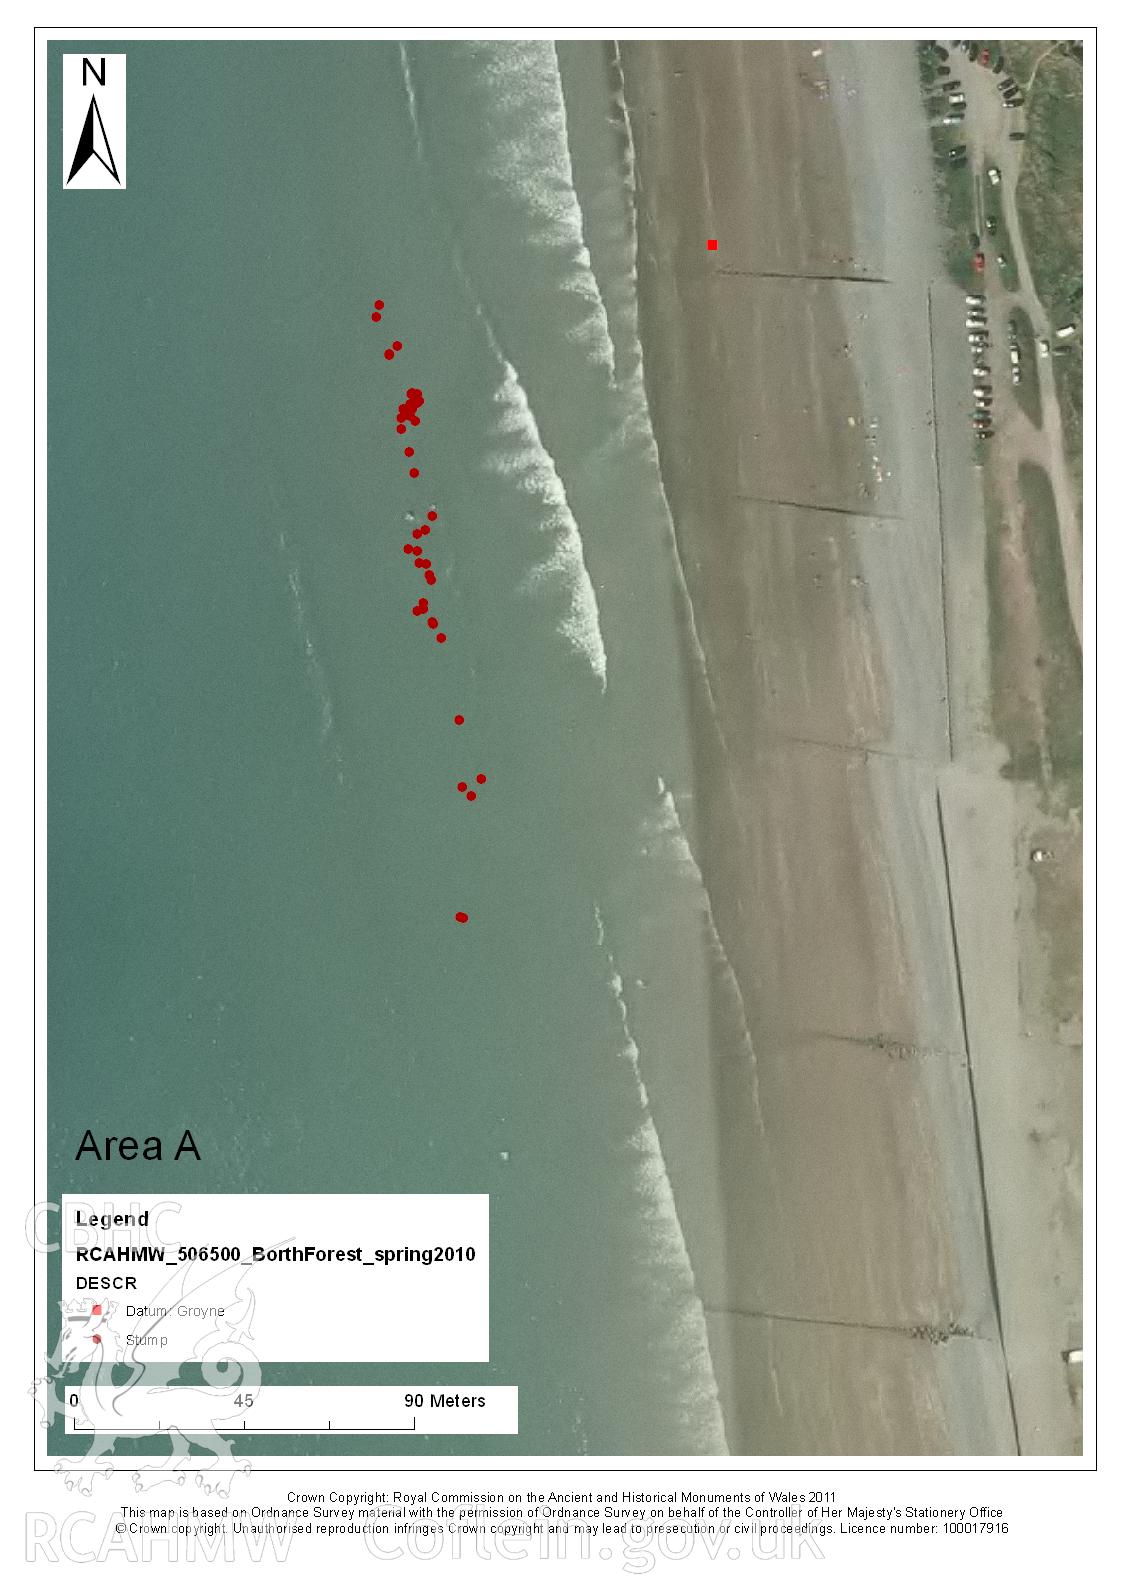 Digital image relating to Level 1 Survey, Borth Submerged Forest: Area A.